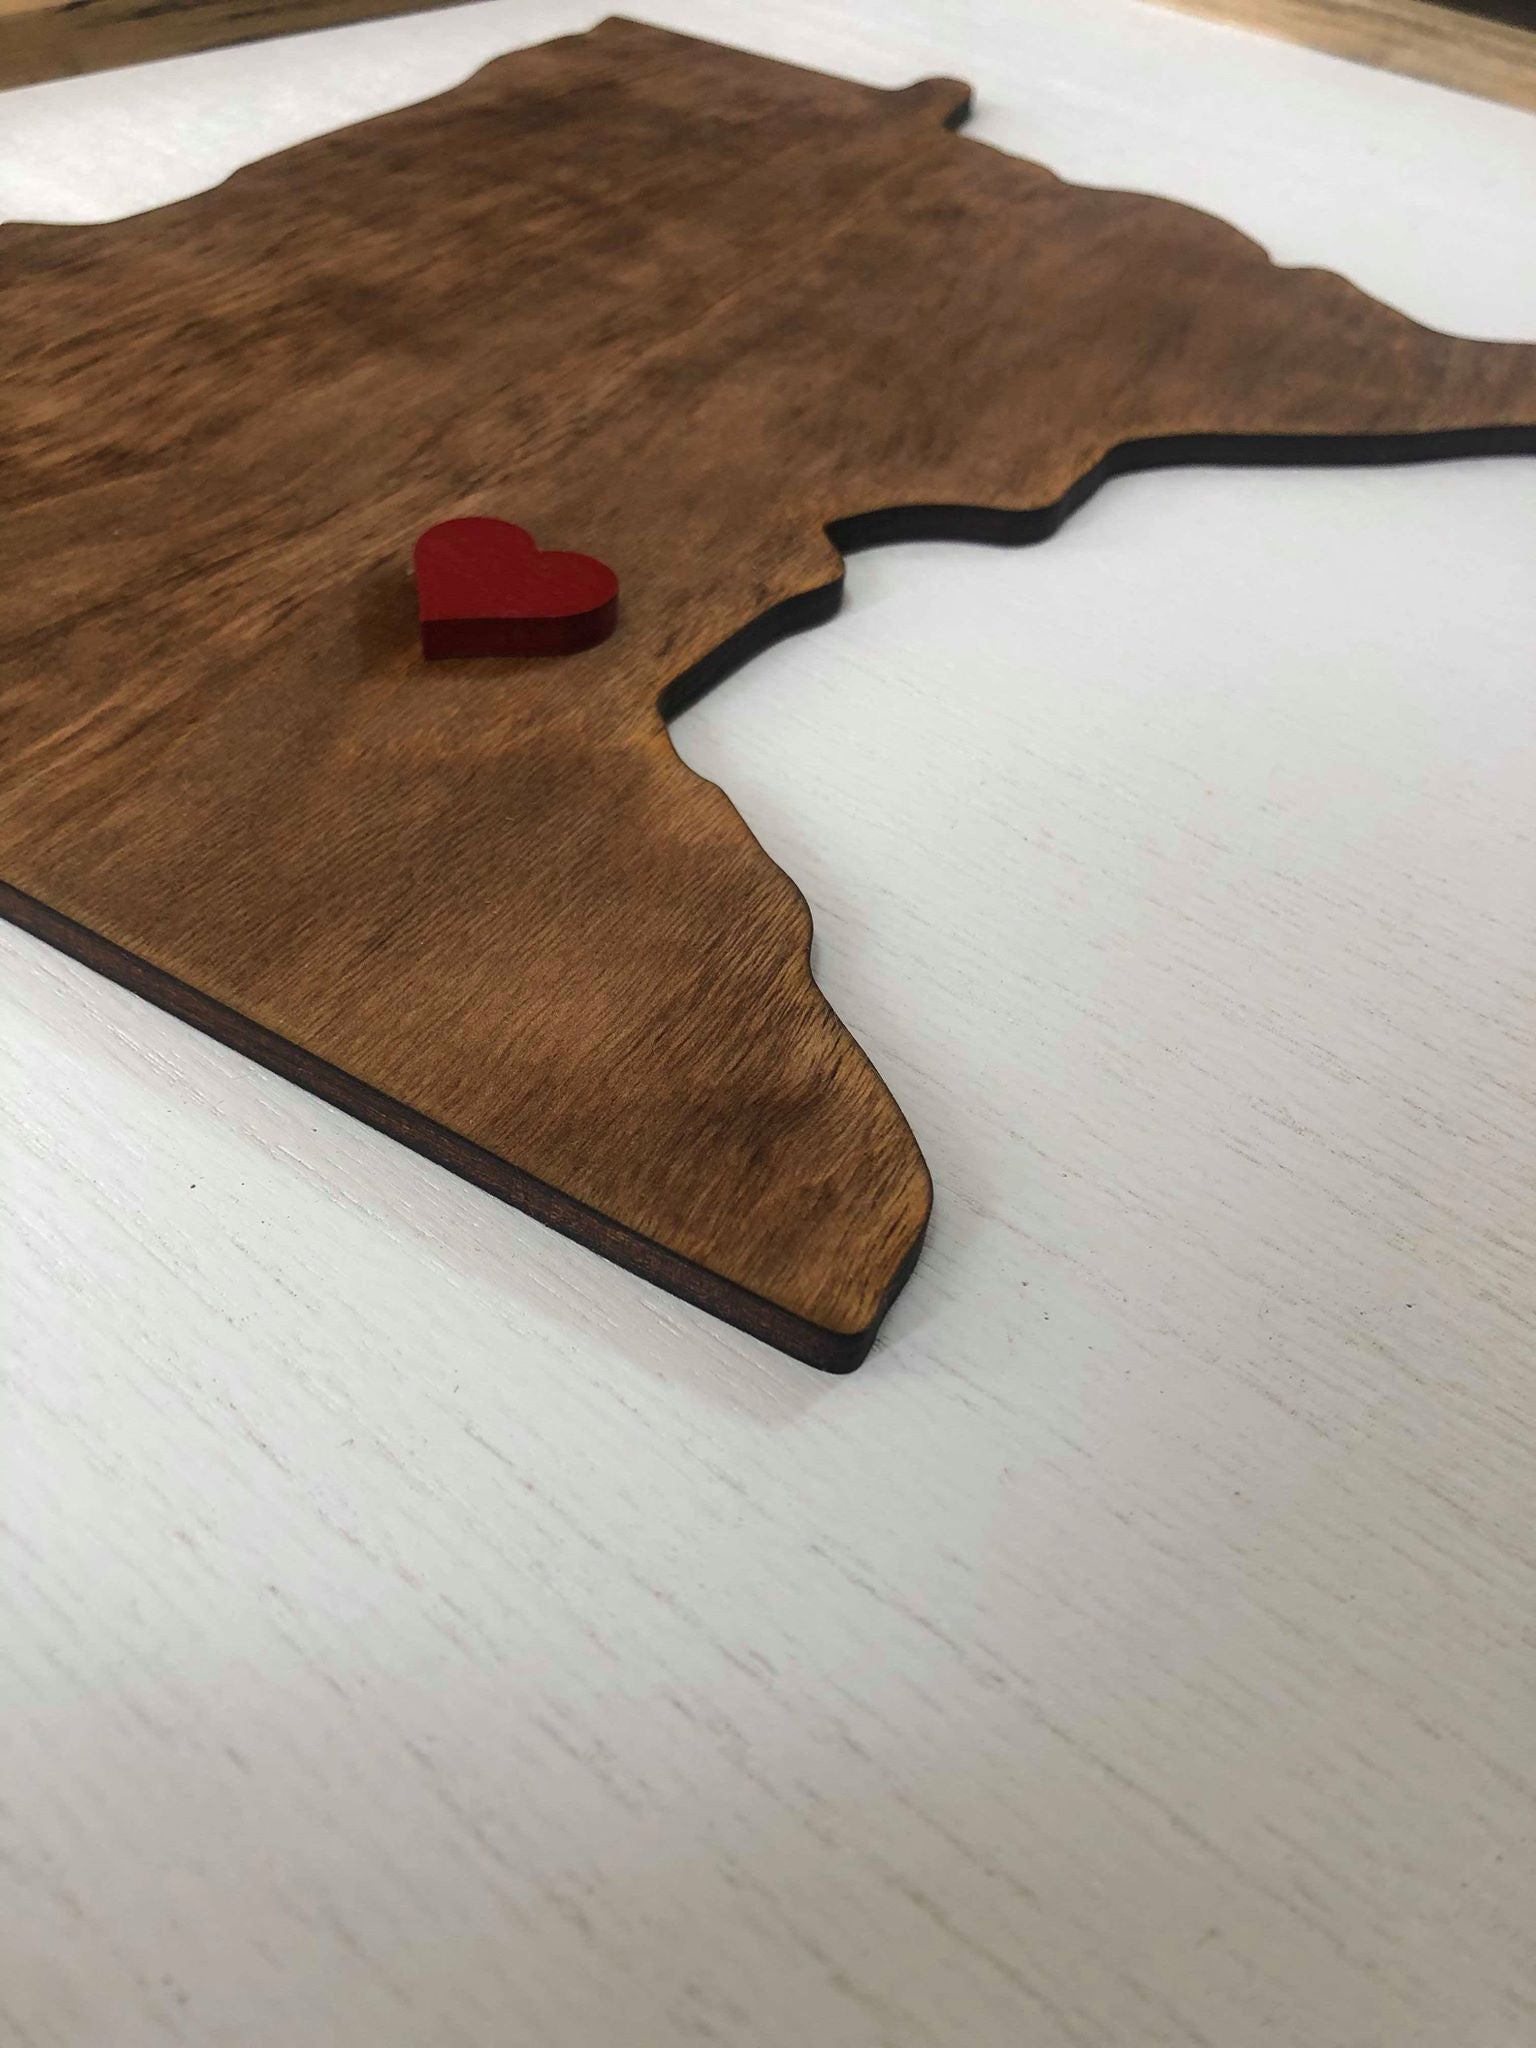 State of Minnesota MN with Red Heart Cutout